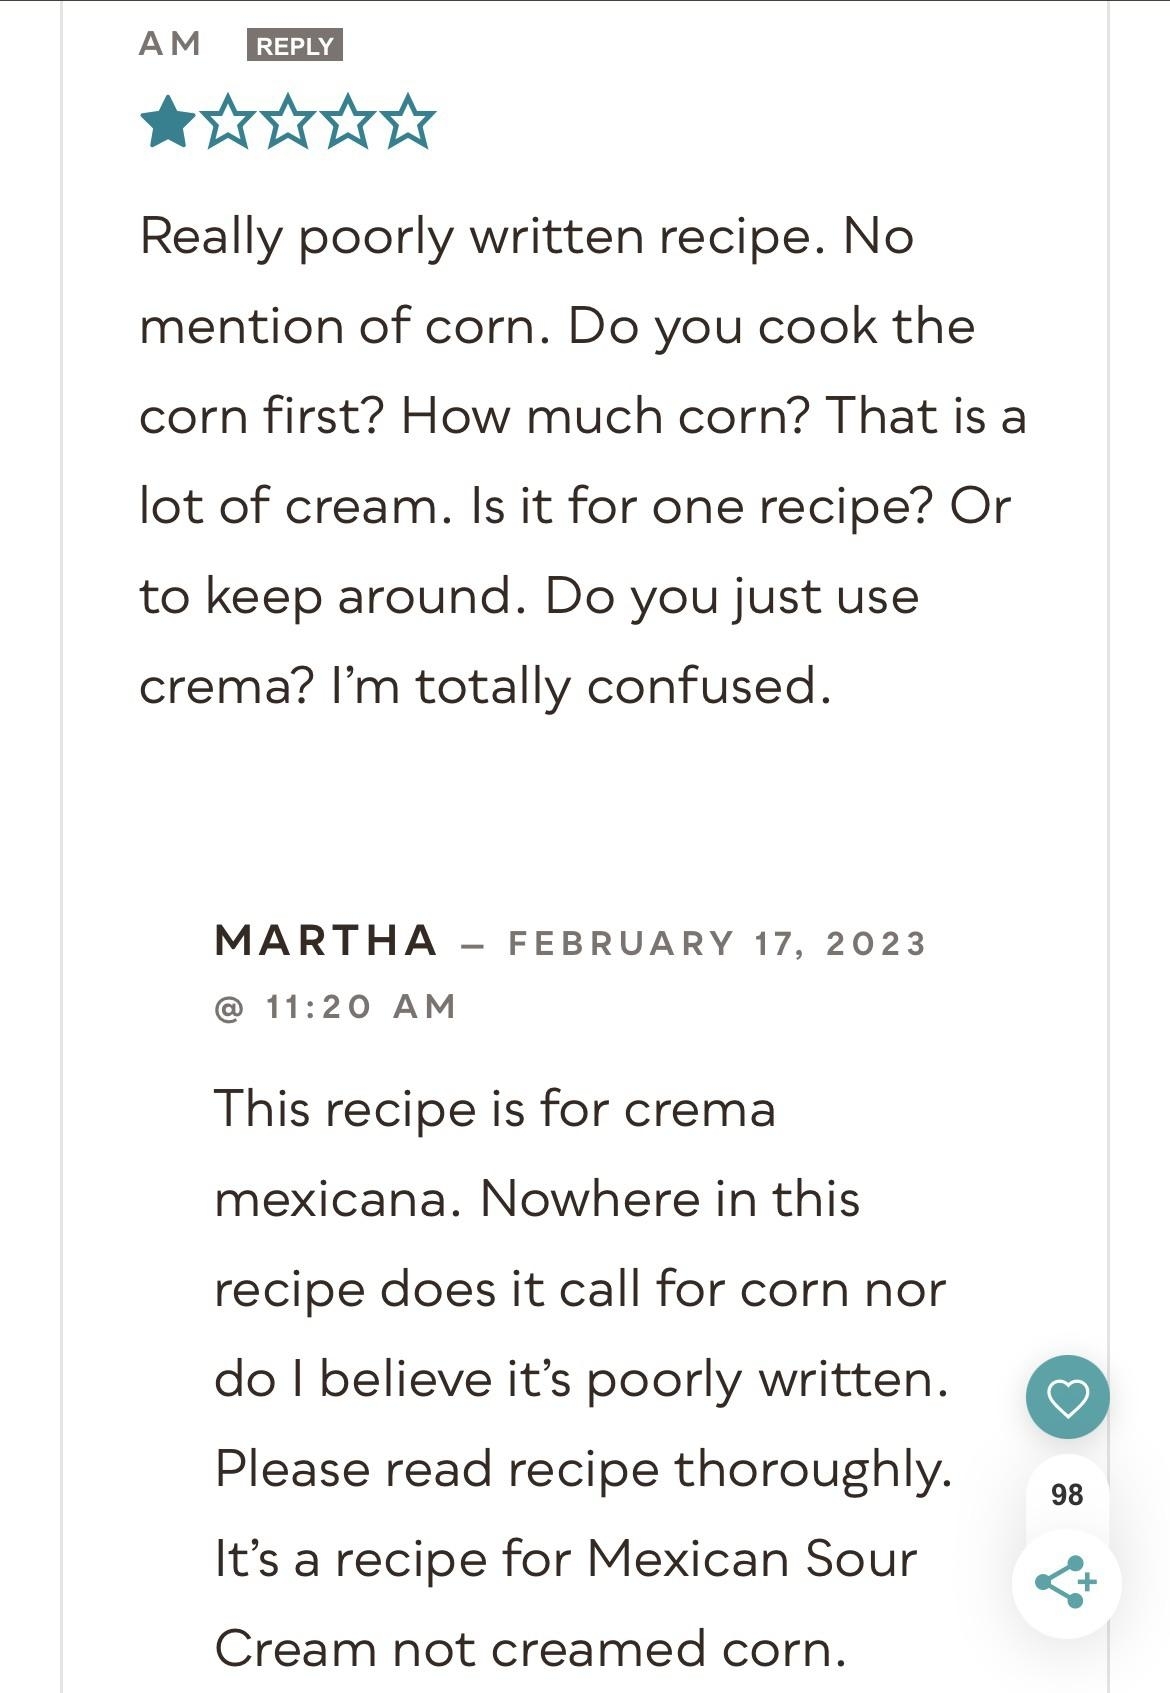 &quot;It&#x27;s a recipe for Mexican Sour Cream not creamed corn.&quot;